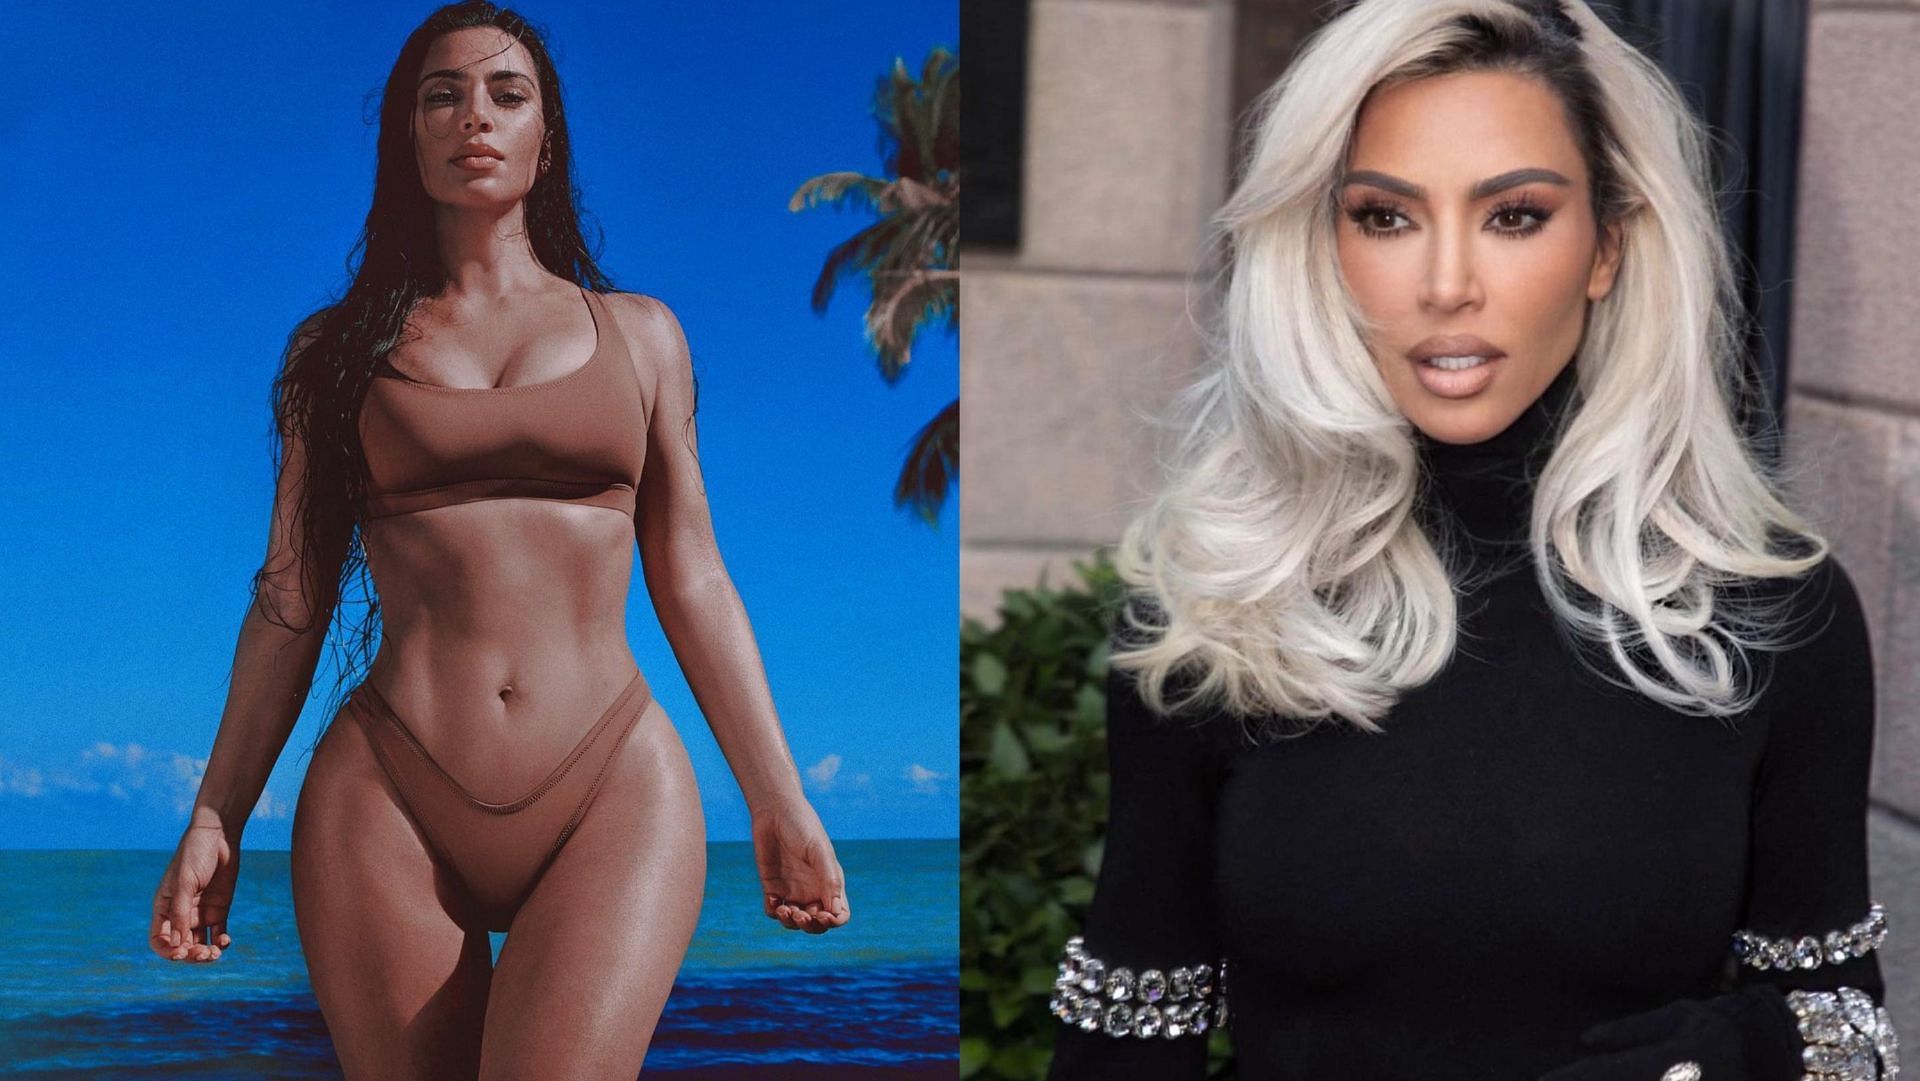 Kim Kardashian went on a strict diet in order to fit into Marilyn Monroe